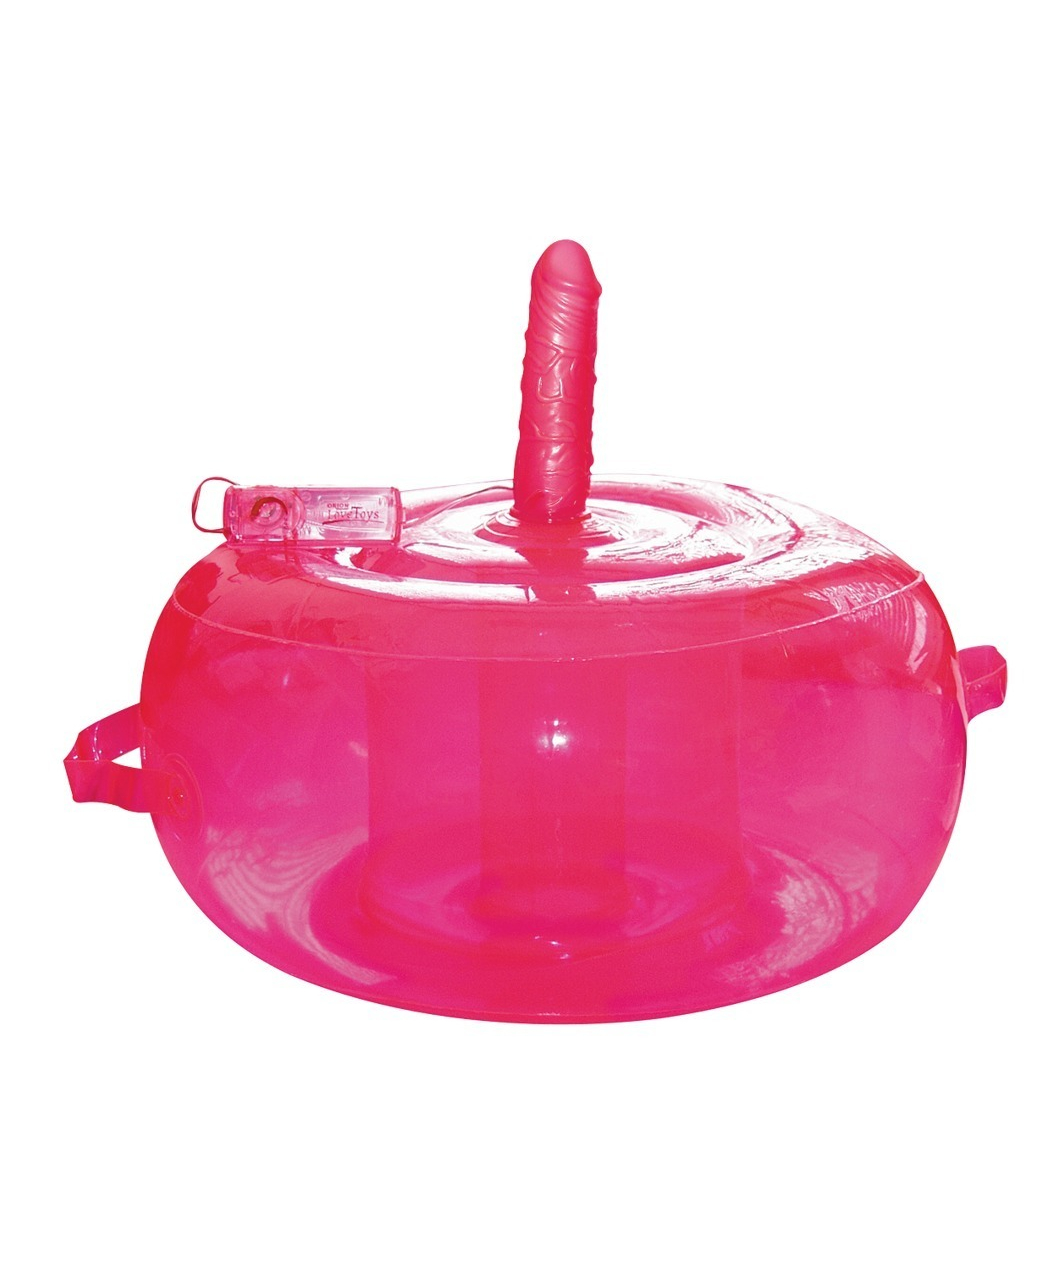 You2Toys Vibrating Love Chair